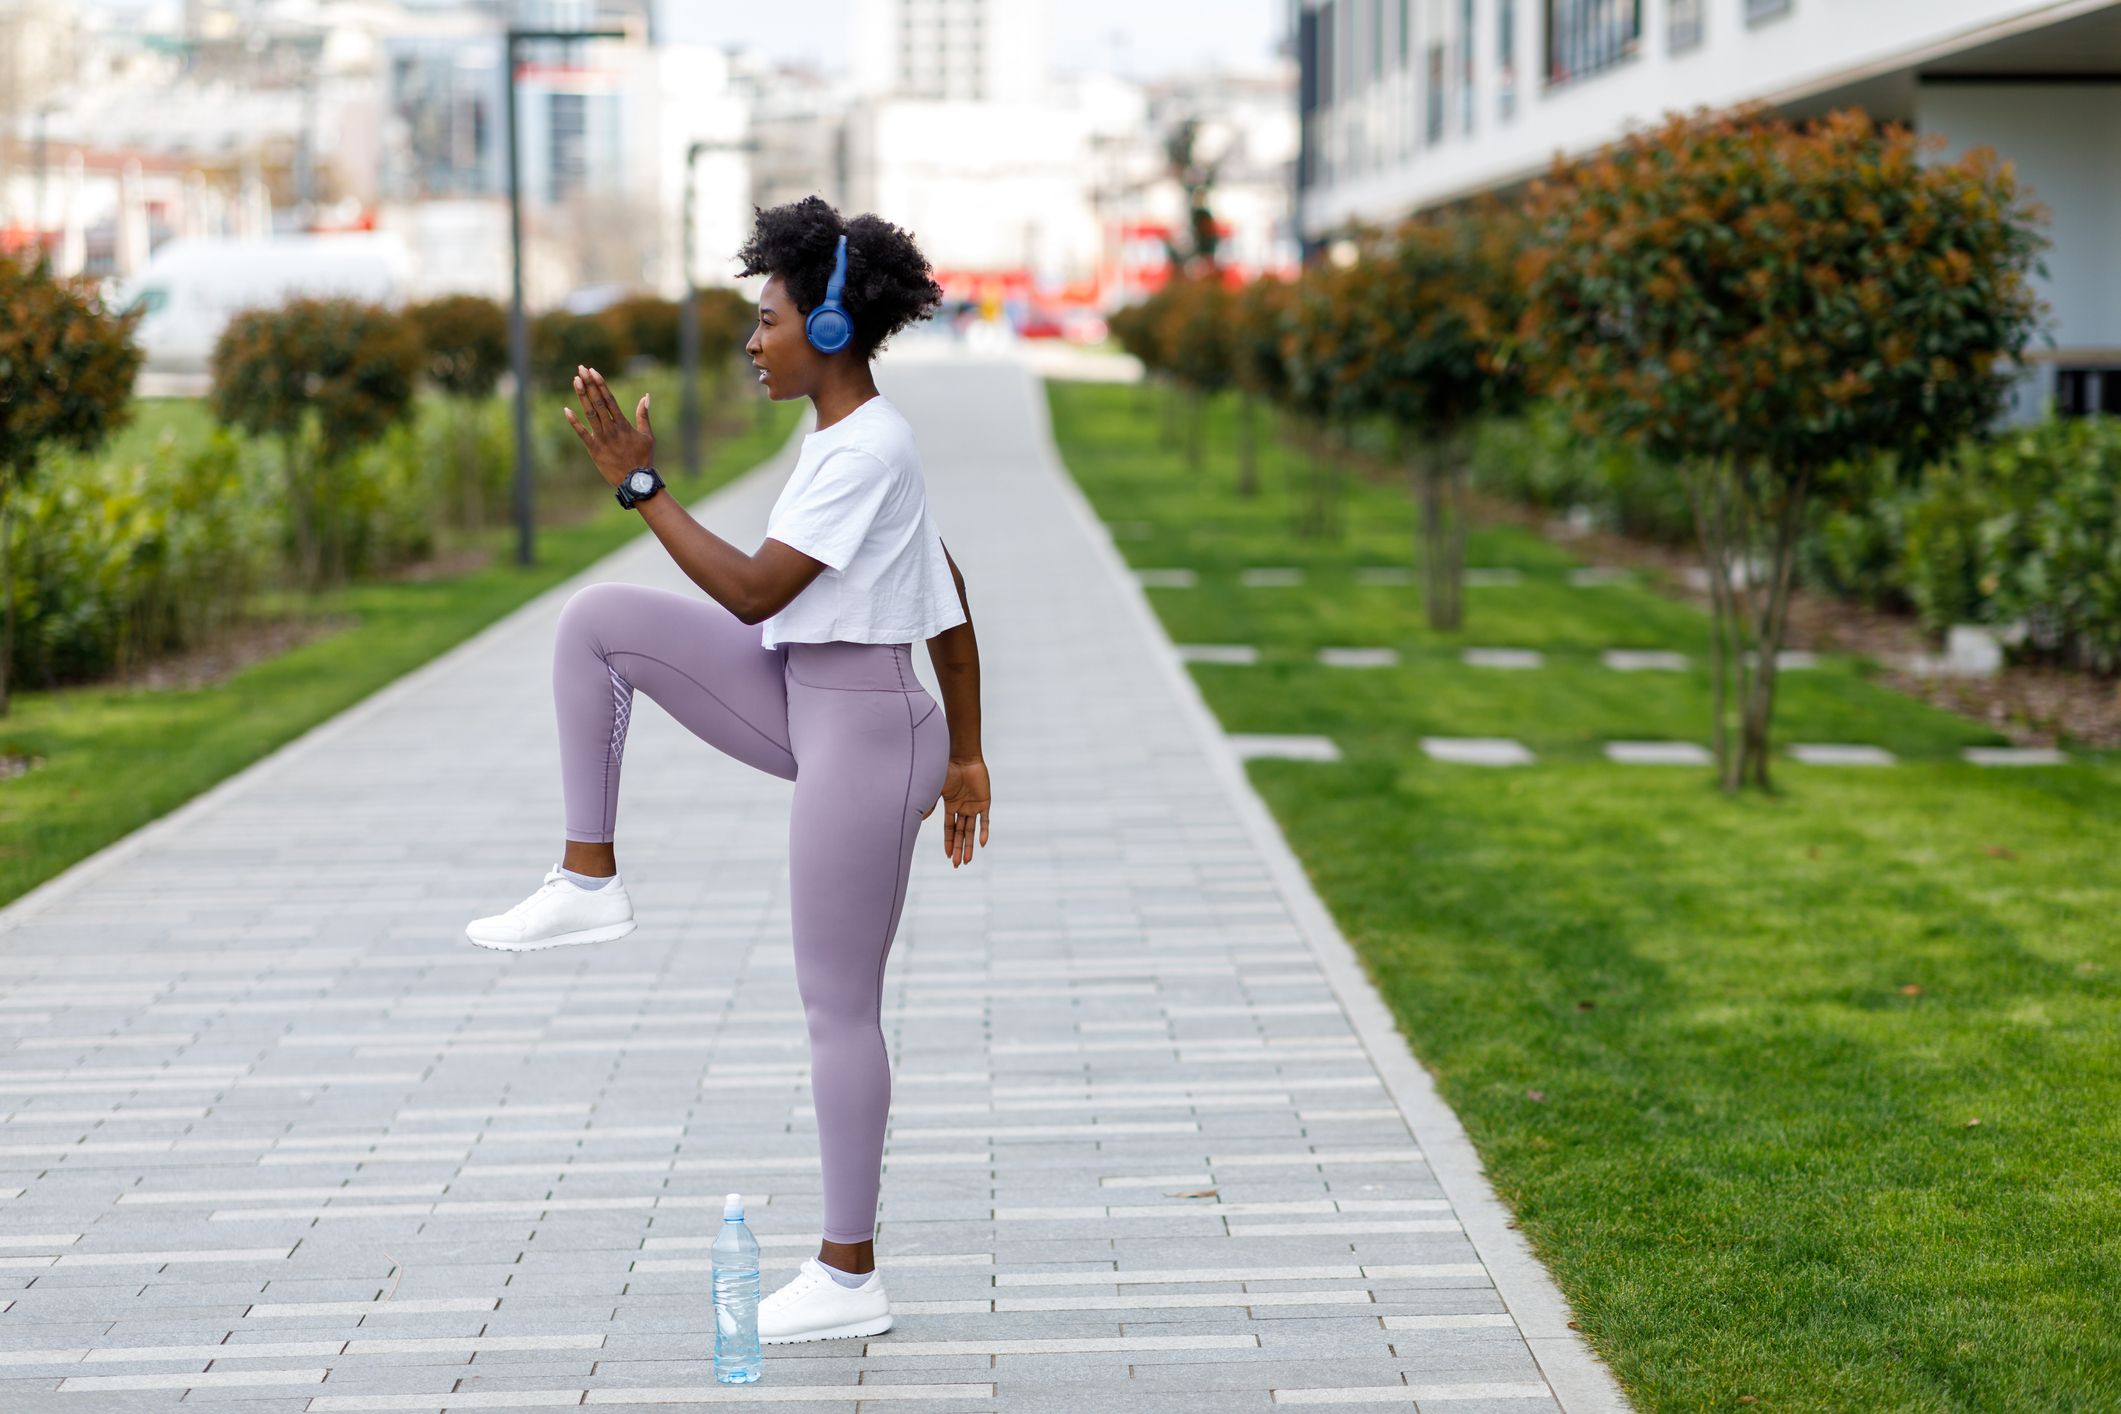 Is it possible to get rid of hip dips? Here's everything girls